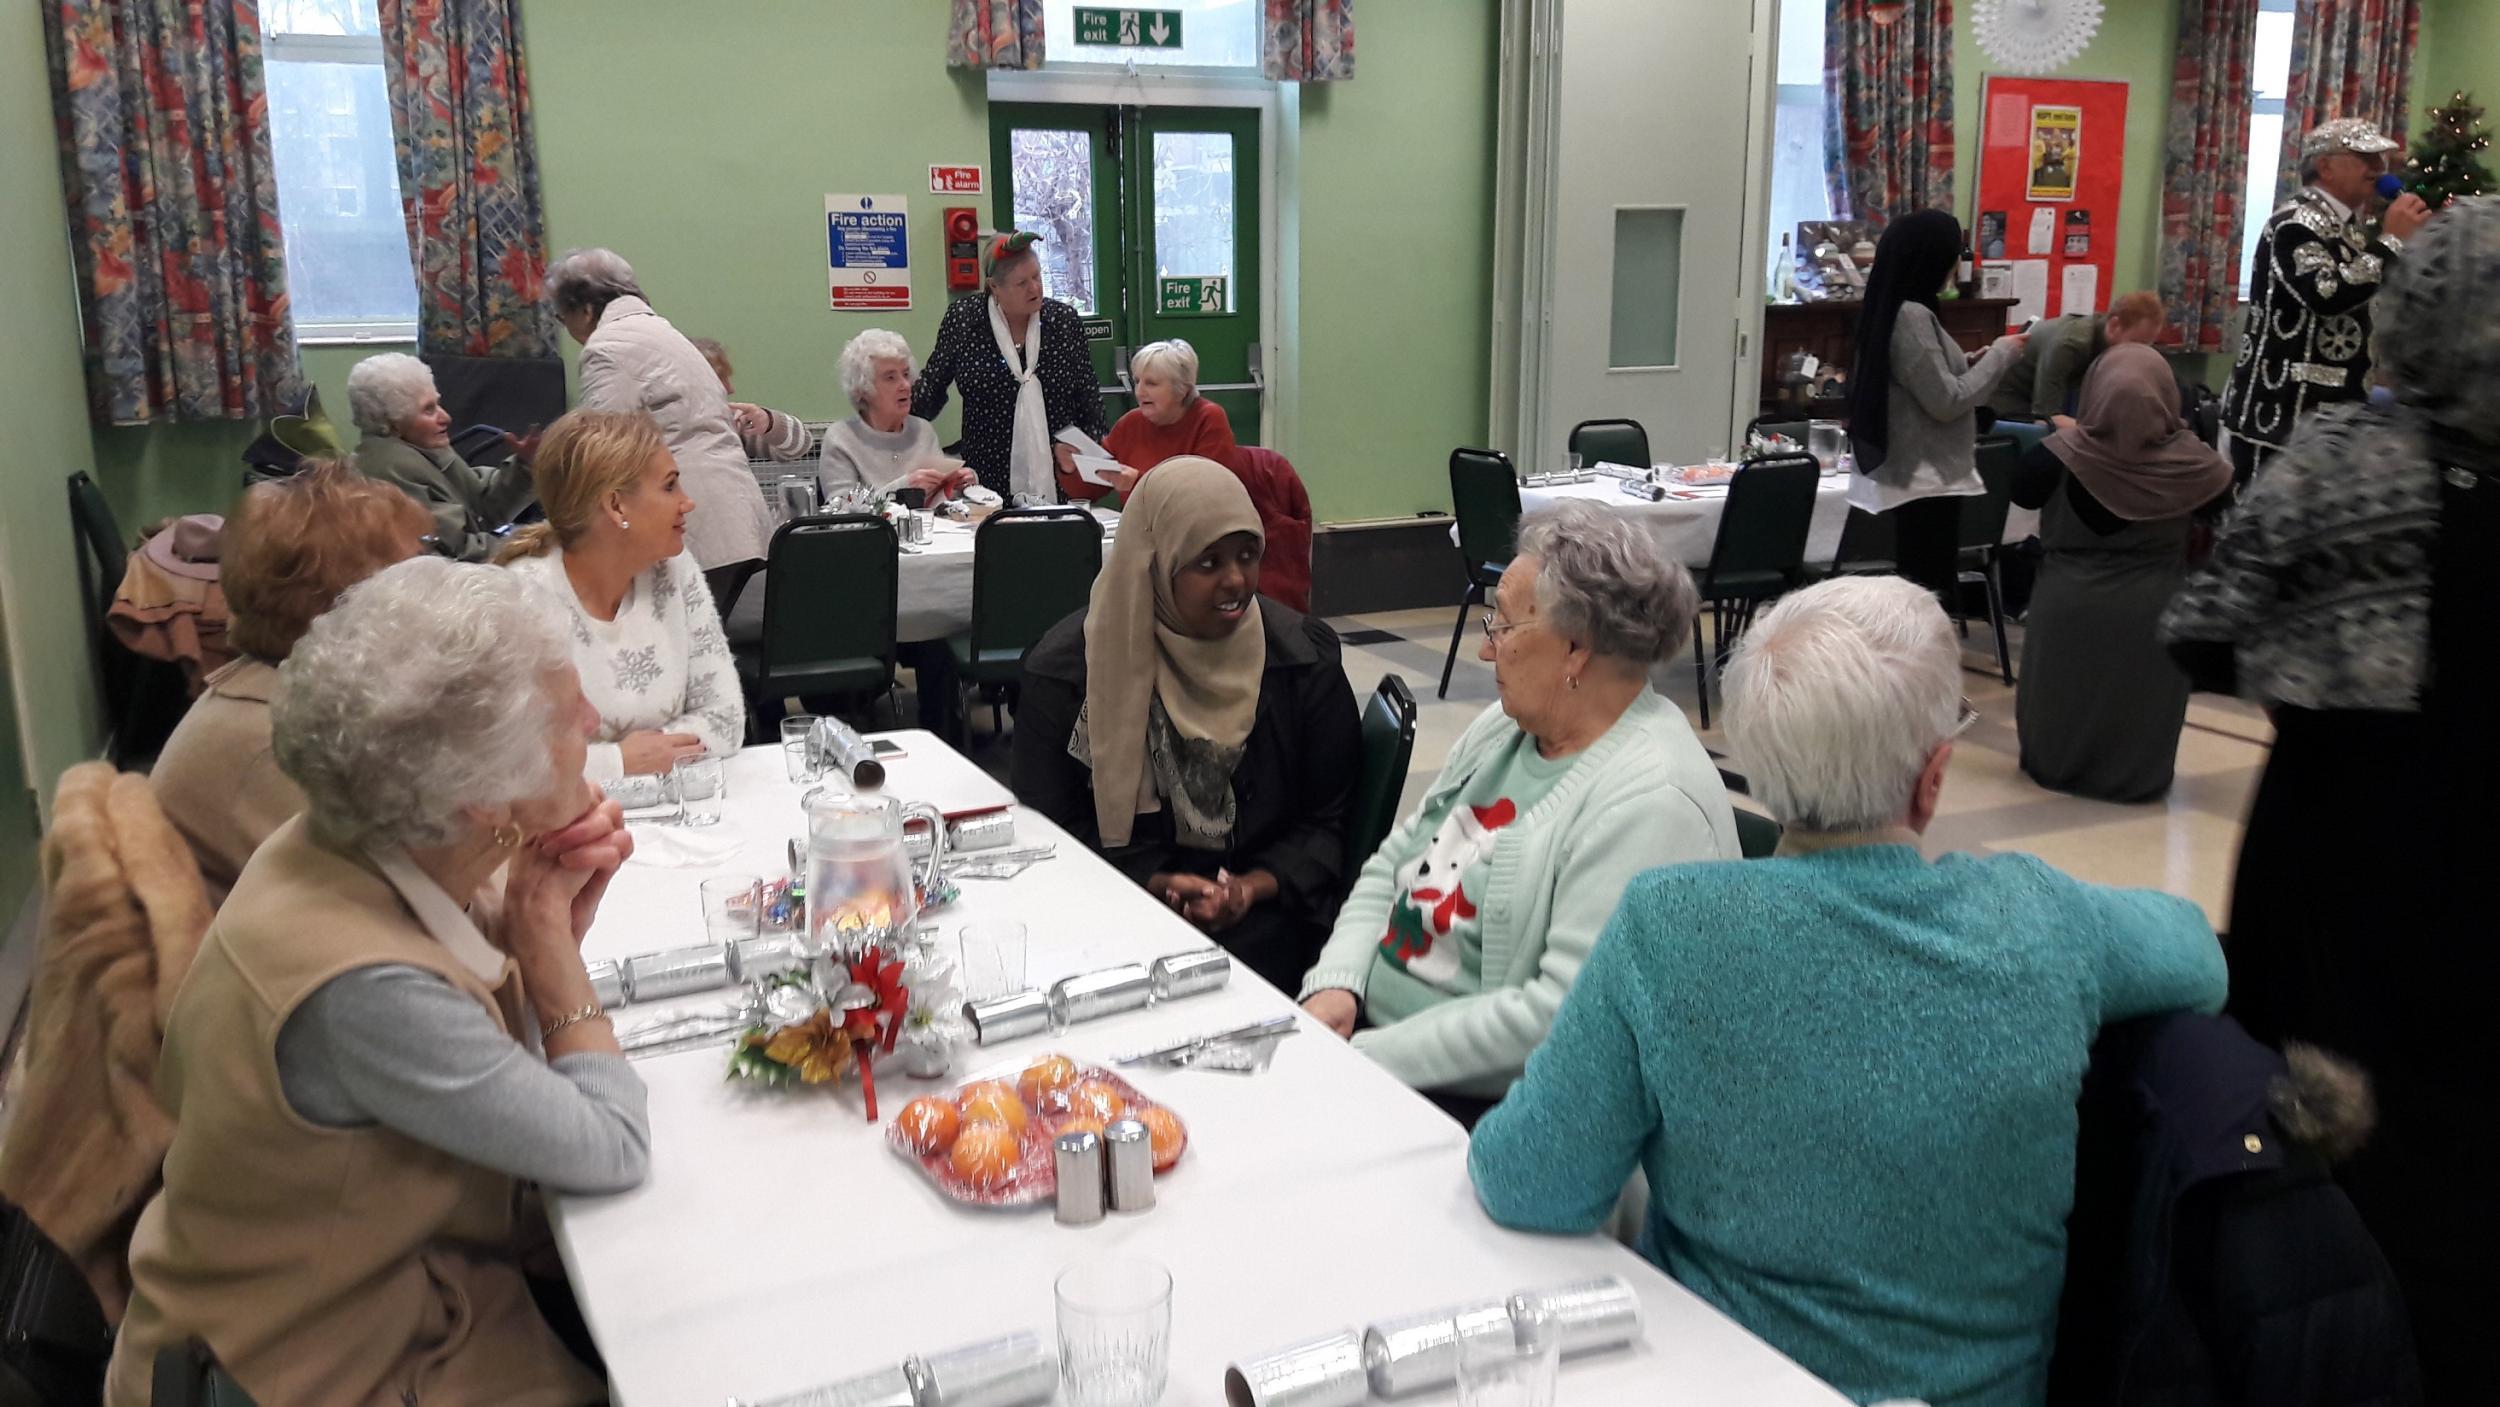 A Muslim Aid volunteer chats with the women at the event